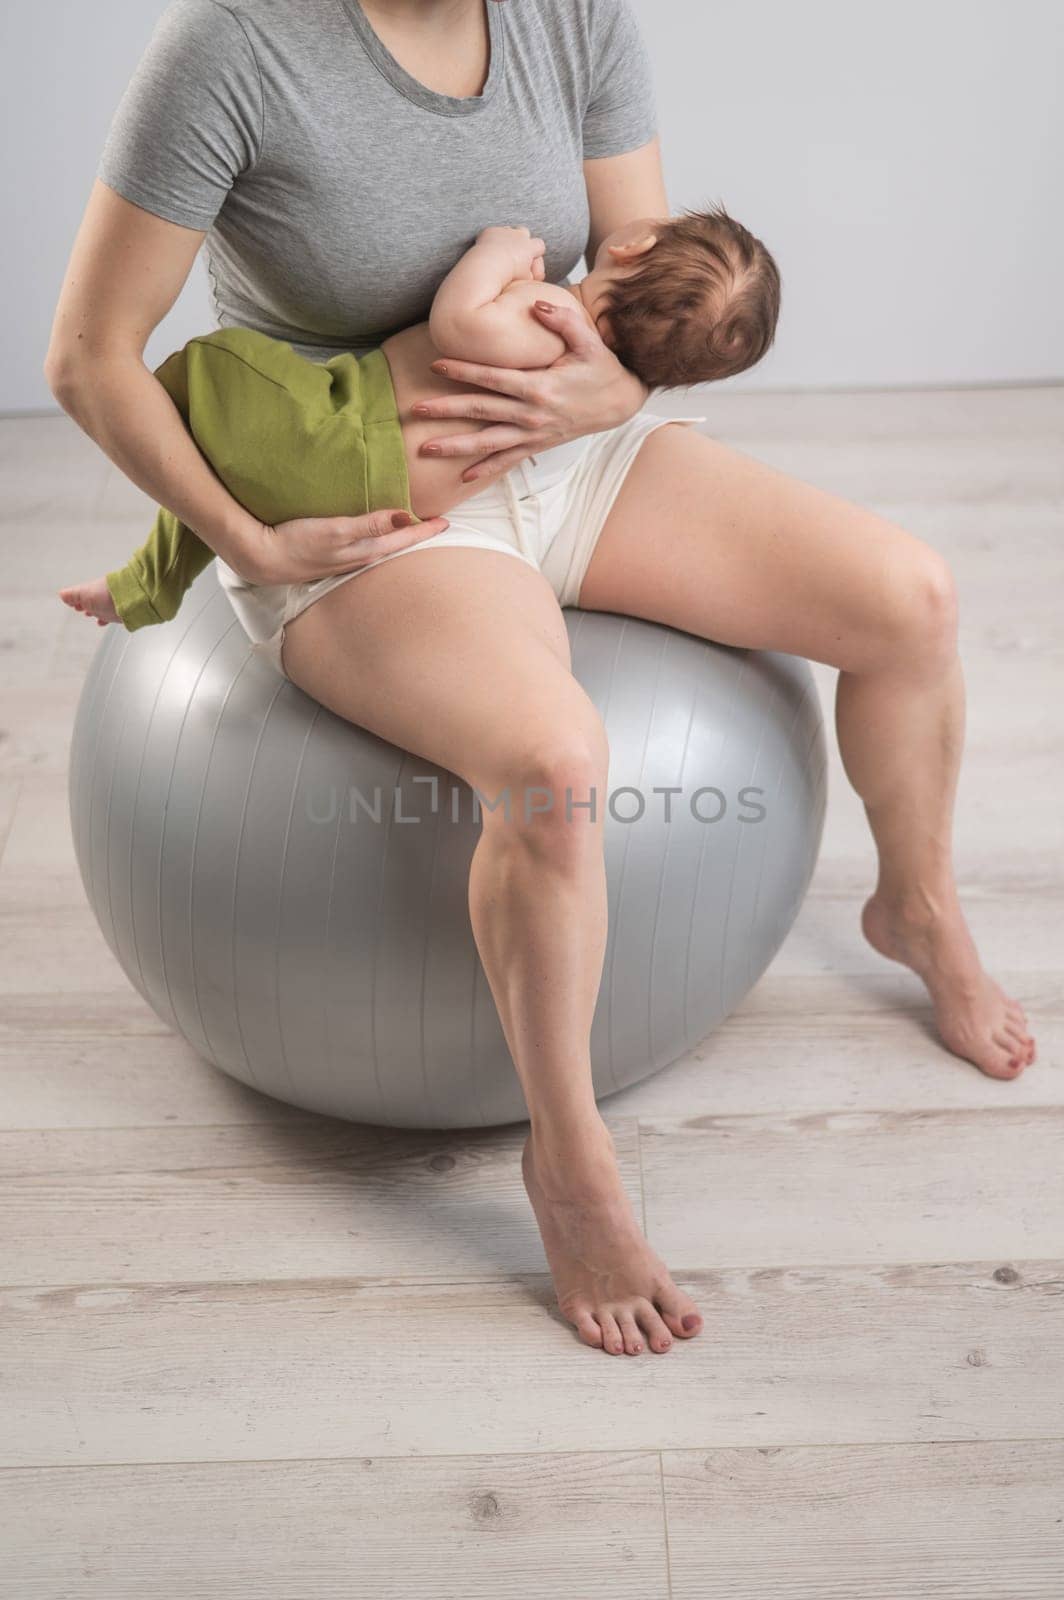 A faceless woman rocks her newborn son on a fitball. Vertical photo. by mrwed54